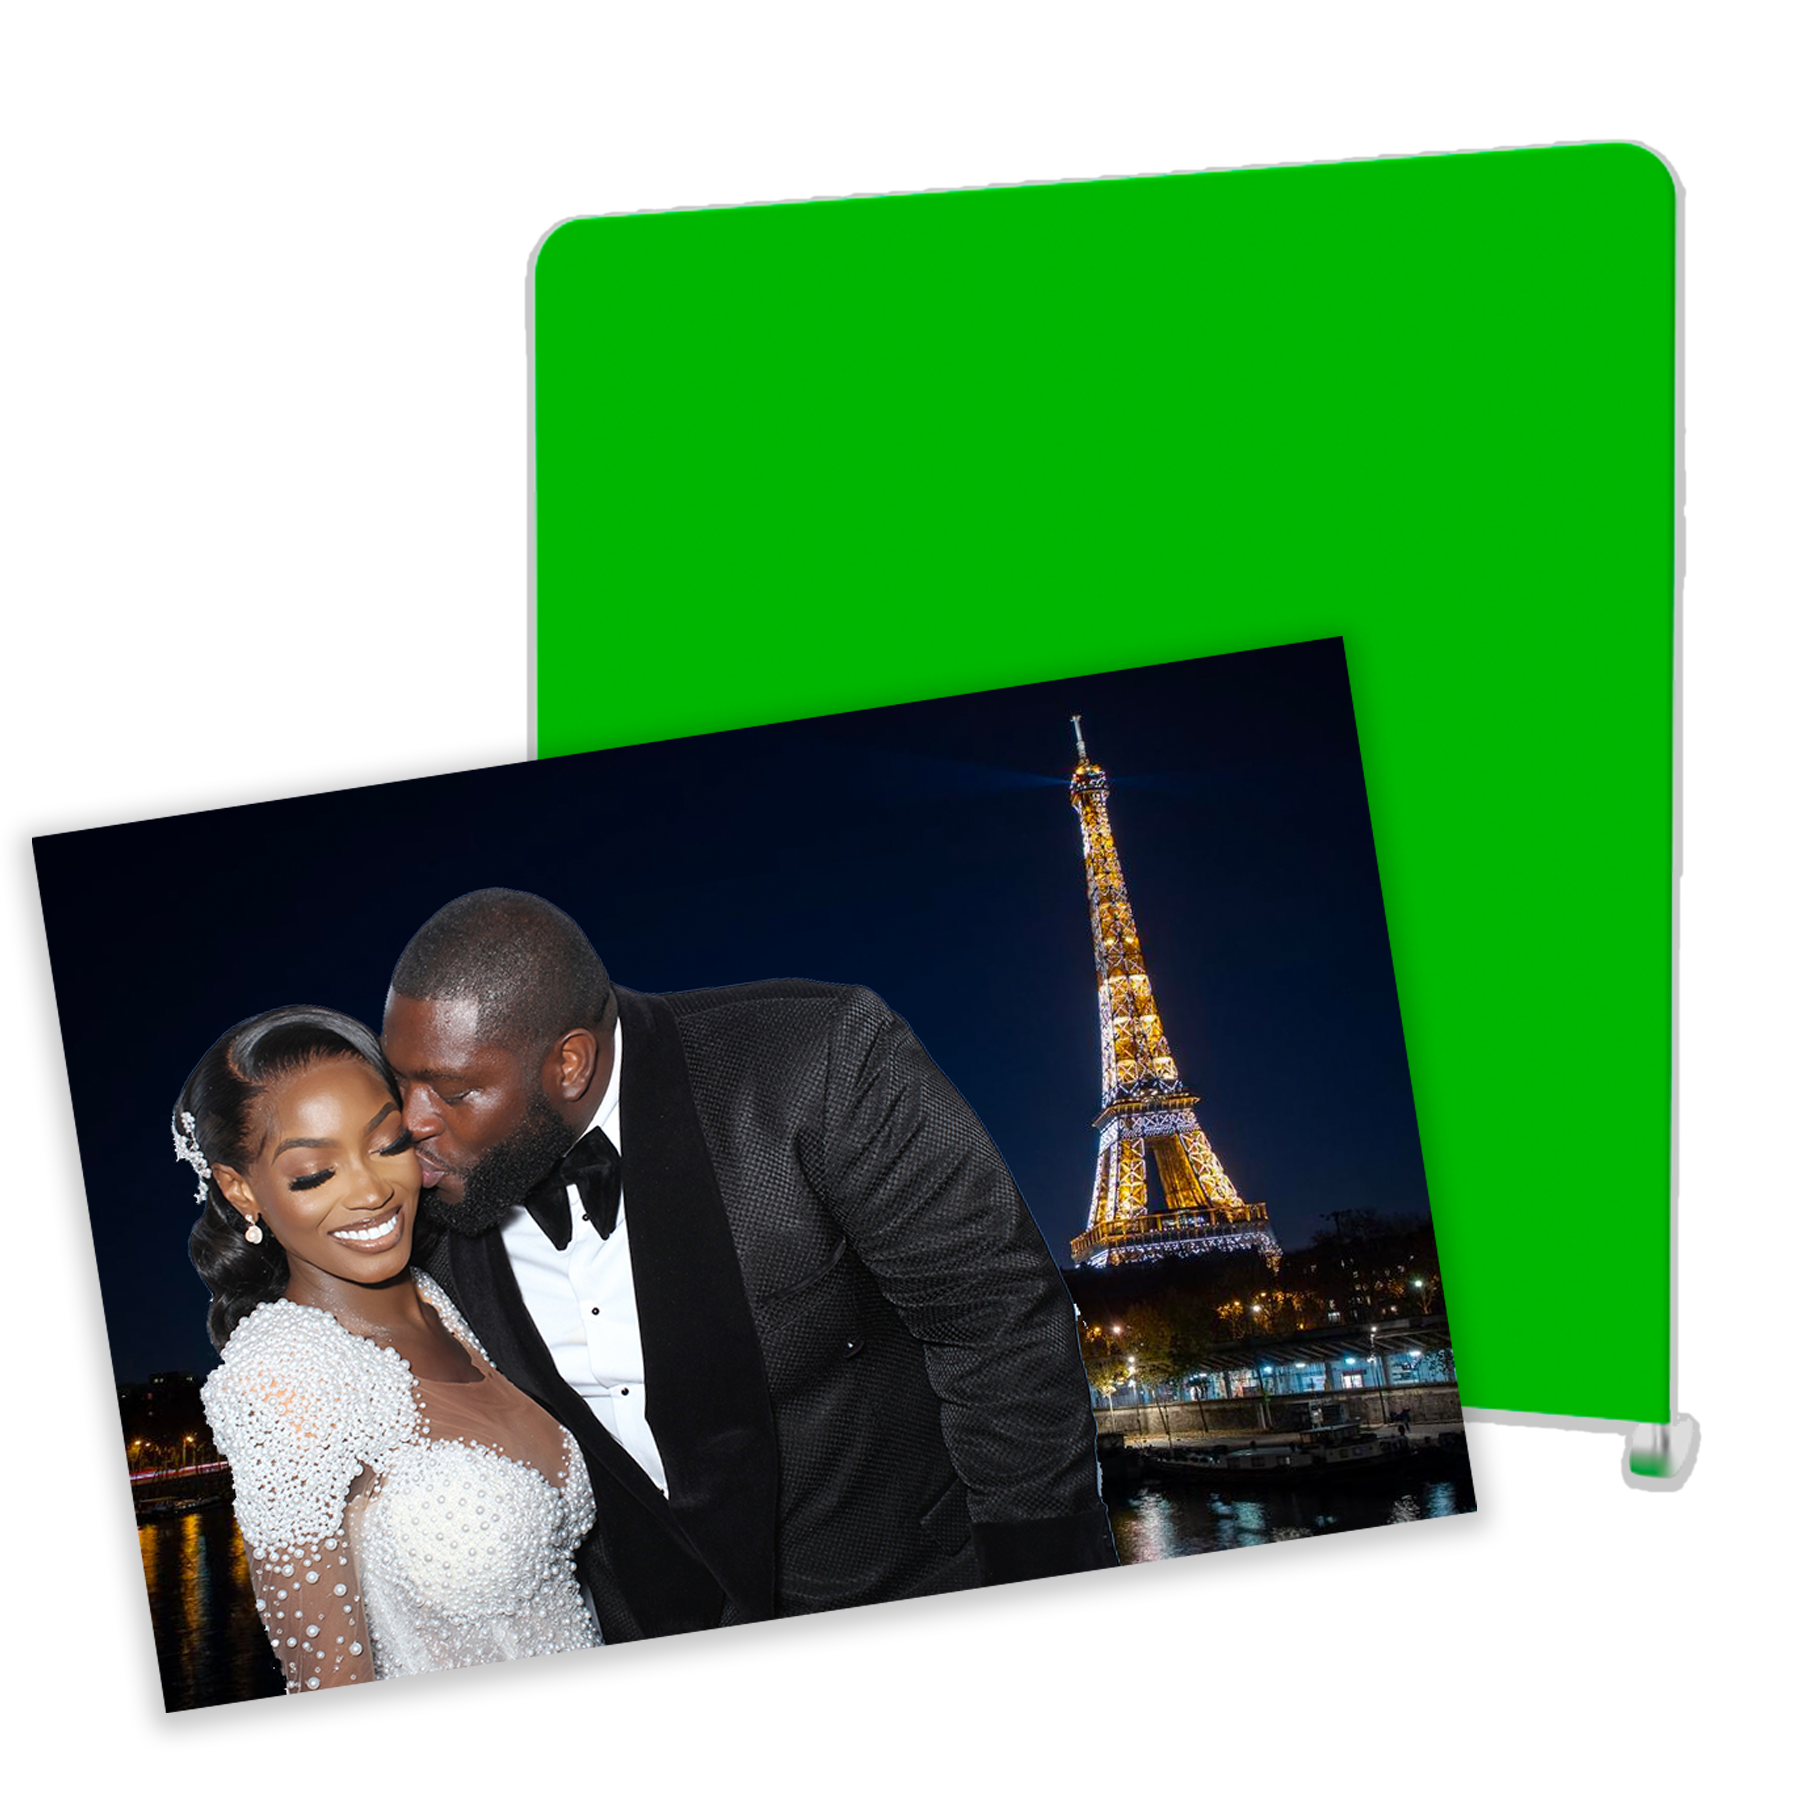 Ineffable Views - Events Page - Add Ons - Green Screen